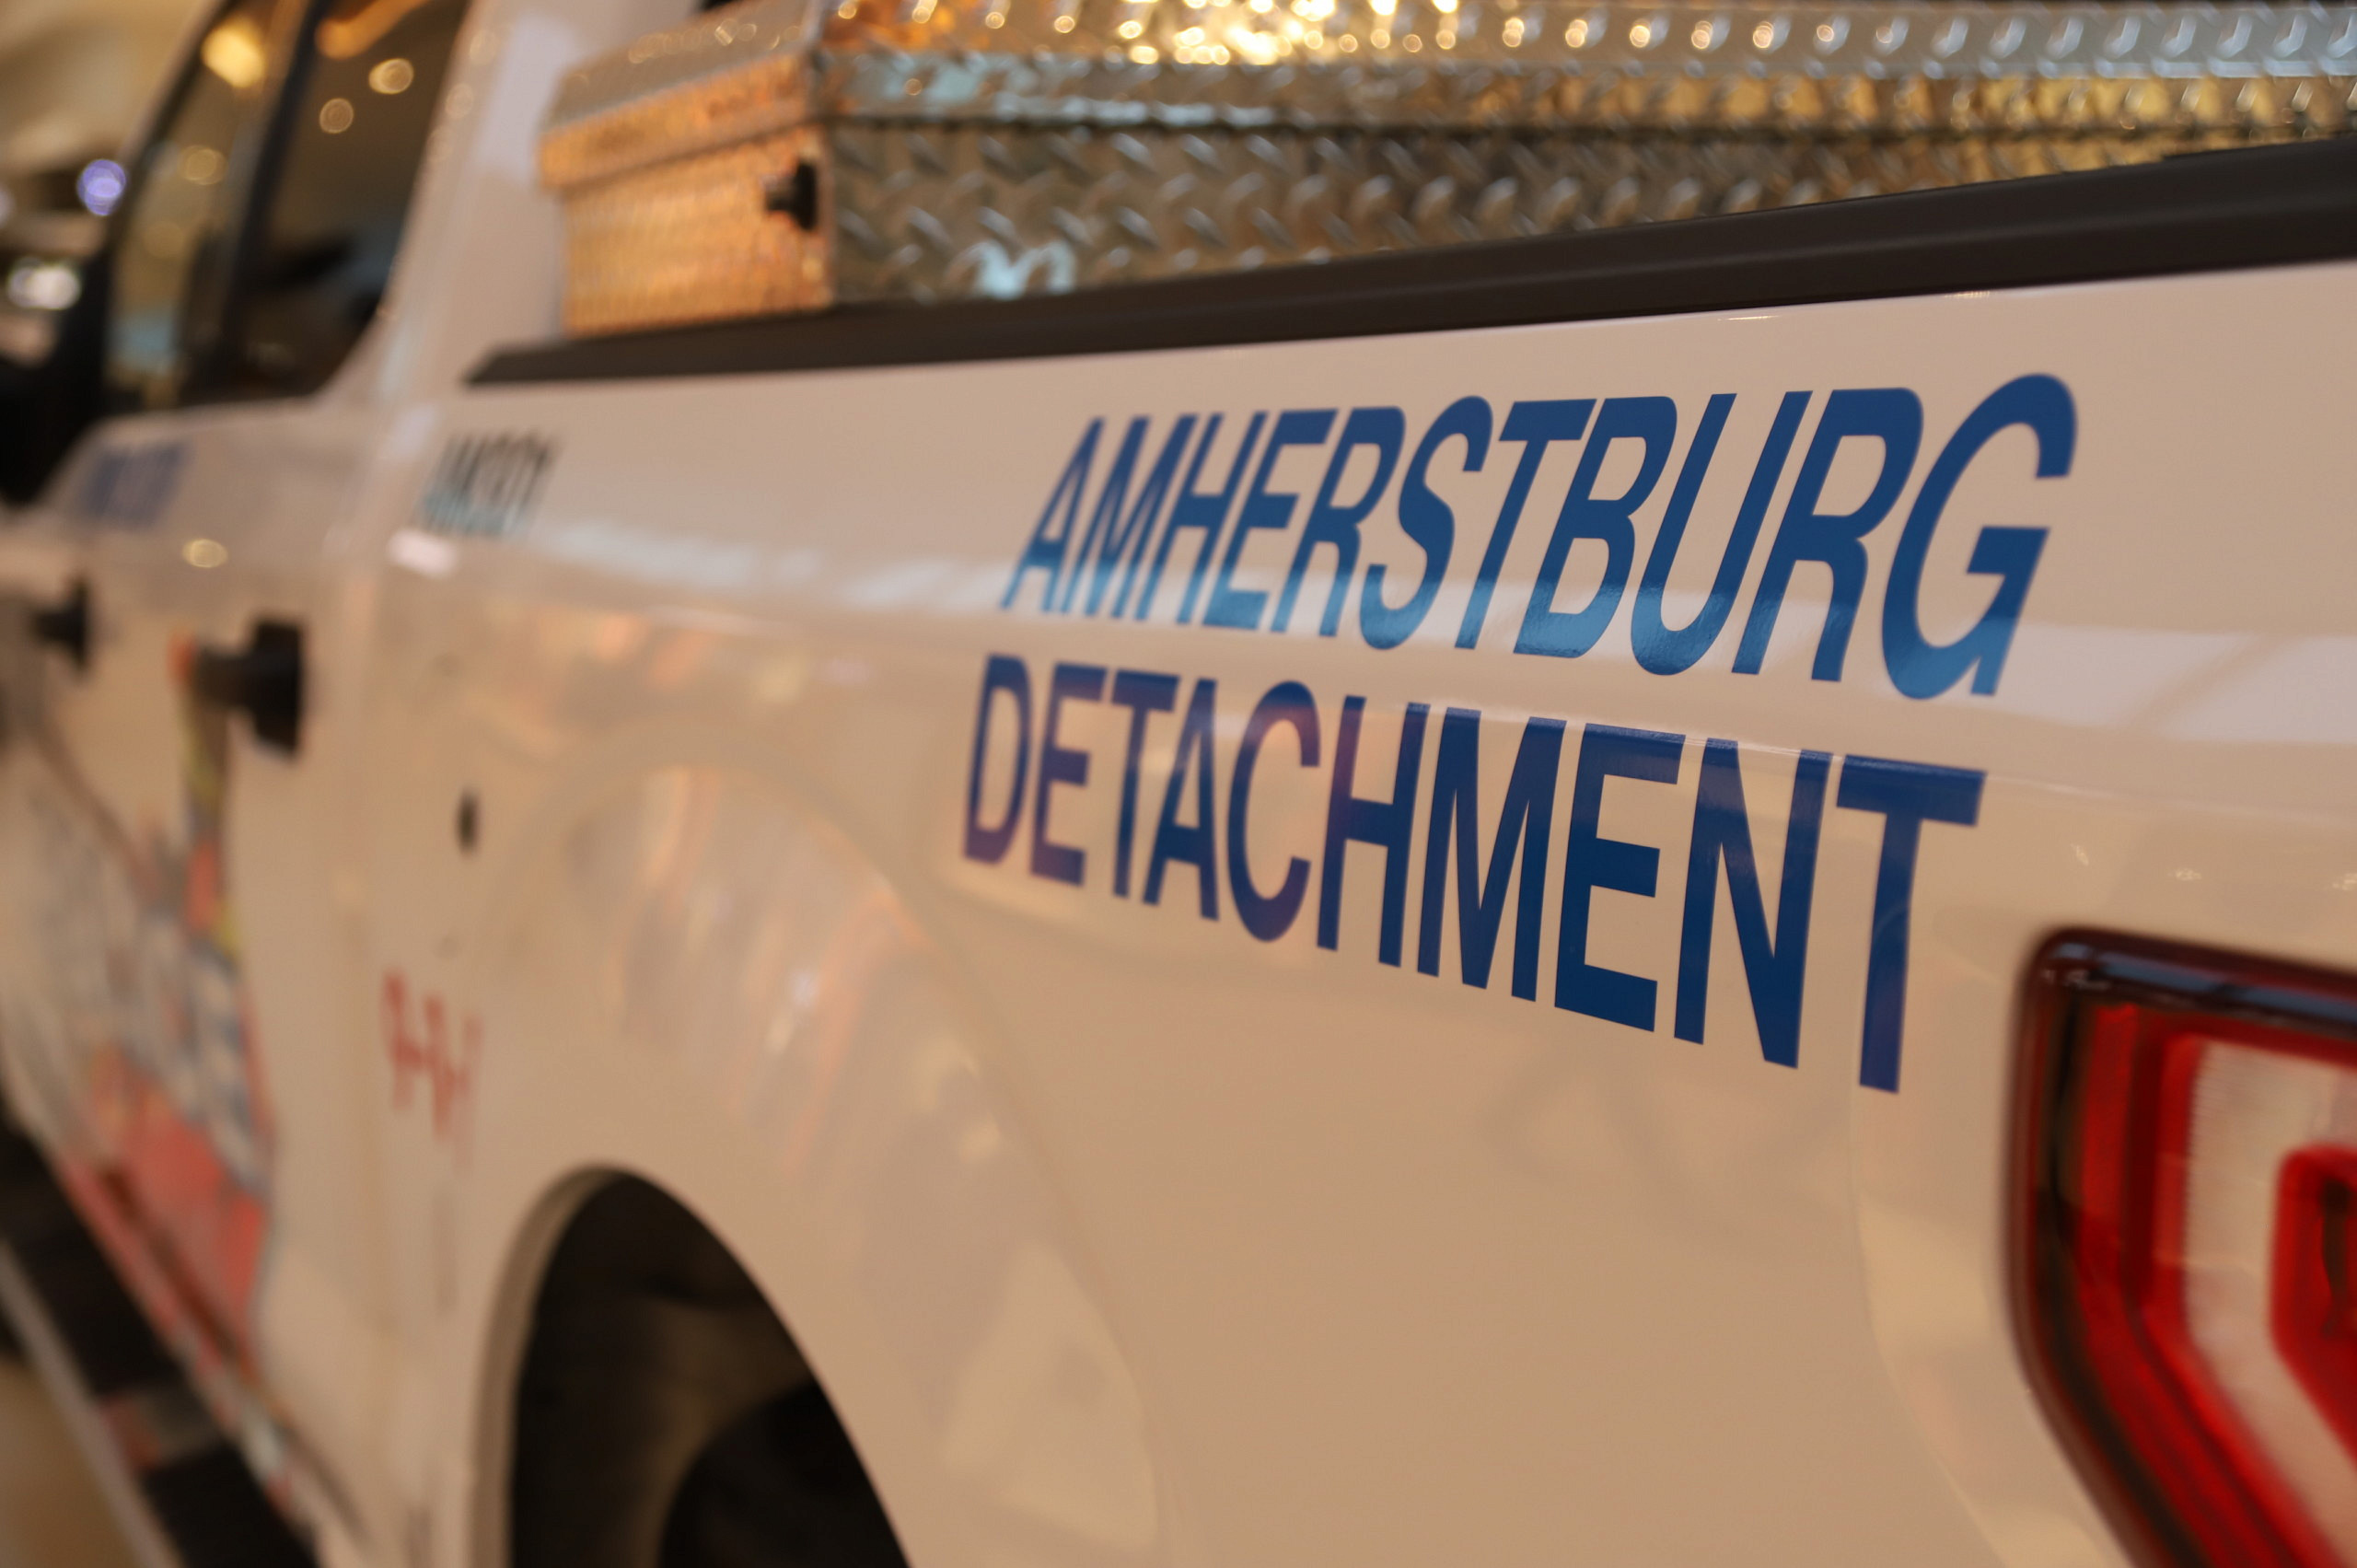 Charge Laid In Fatal Accident In Amherstburg - windsoriteDOTca News